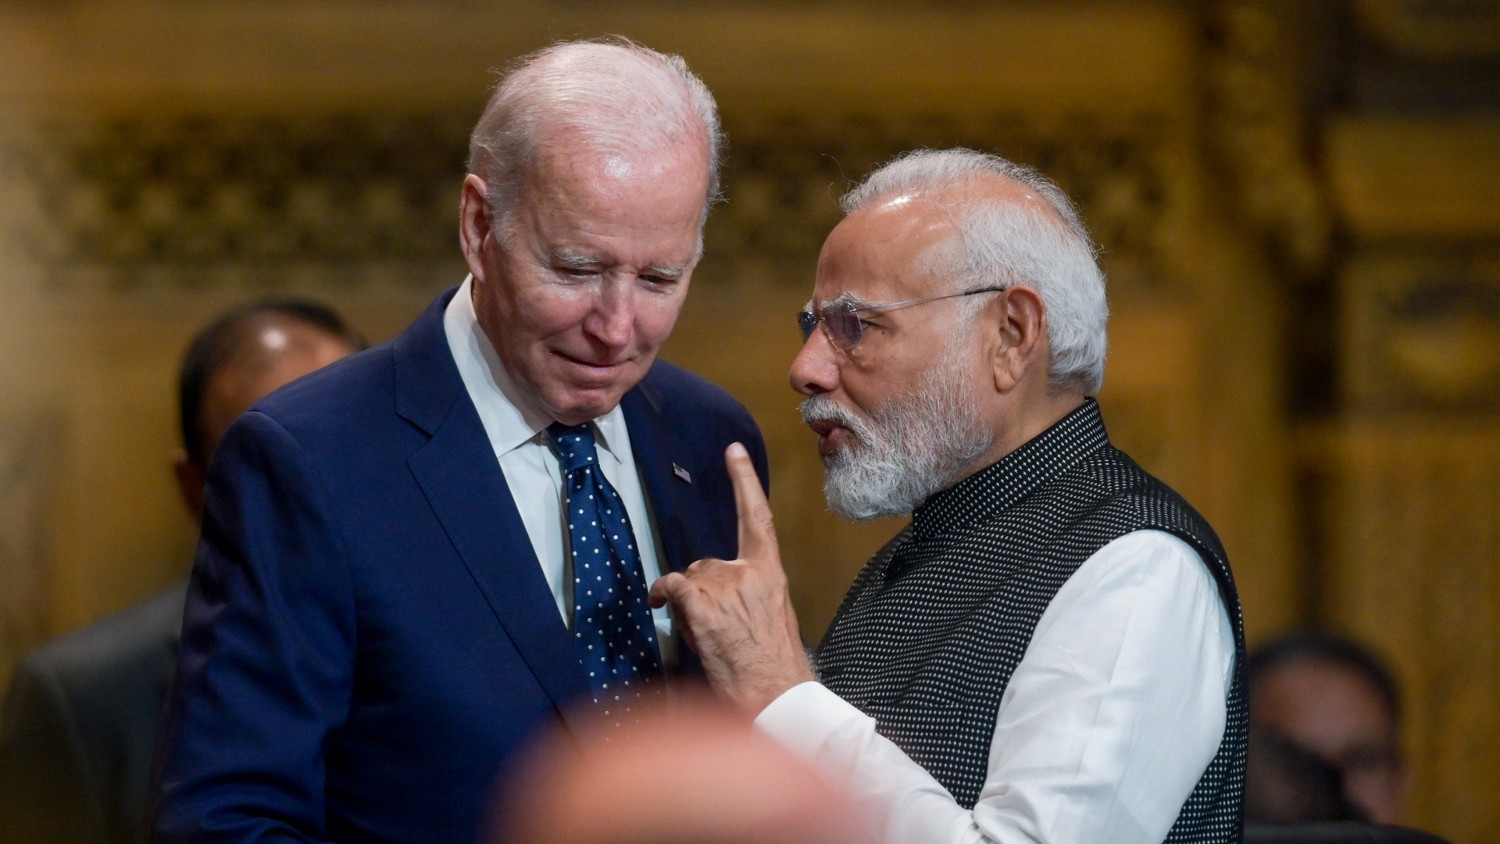 US President Joe Biden talks with India's Prime Minister Narendra Modi at the opening of the G20 Summit in Nusa Dua on the Indonesian resort island of Bali on 15 November 2022.